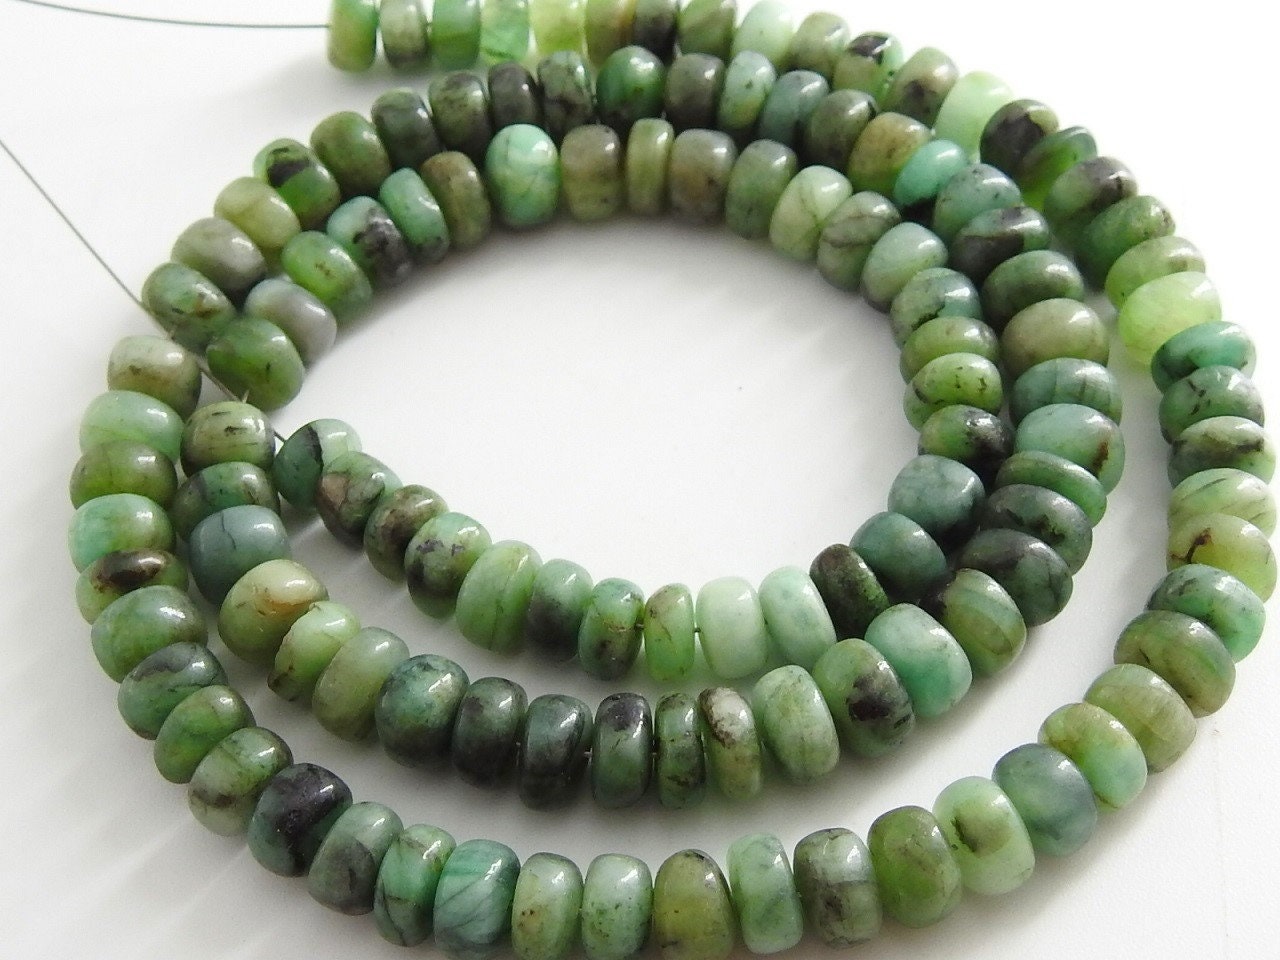 Emerald Smooth Roundel Bead,Shaded,Loose Stone,Handmade,Wholesale Price,New Arrival,18Inch Strand 100%Natural PME(B12) | Save 33% - Rajasthan Living 15